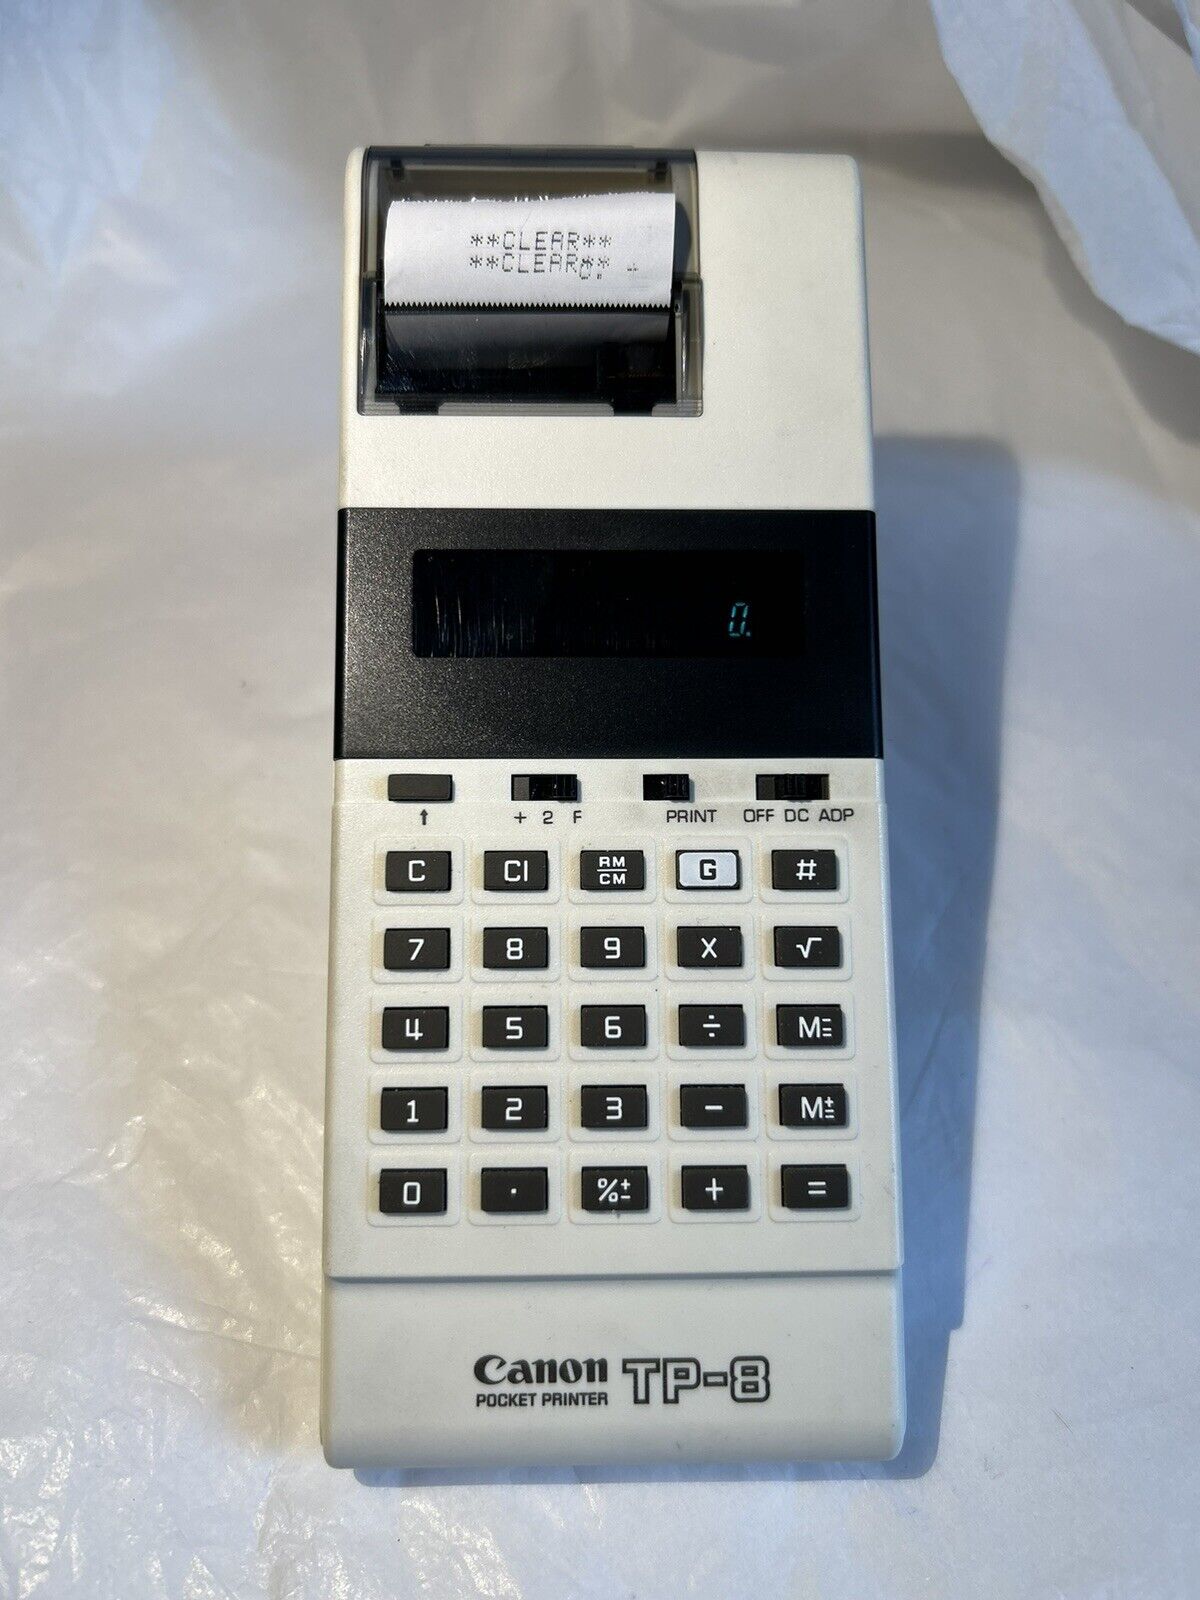 Canon TP-8 Pocket Printer Calculator Tested & Working Comes With Partial Roll